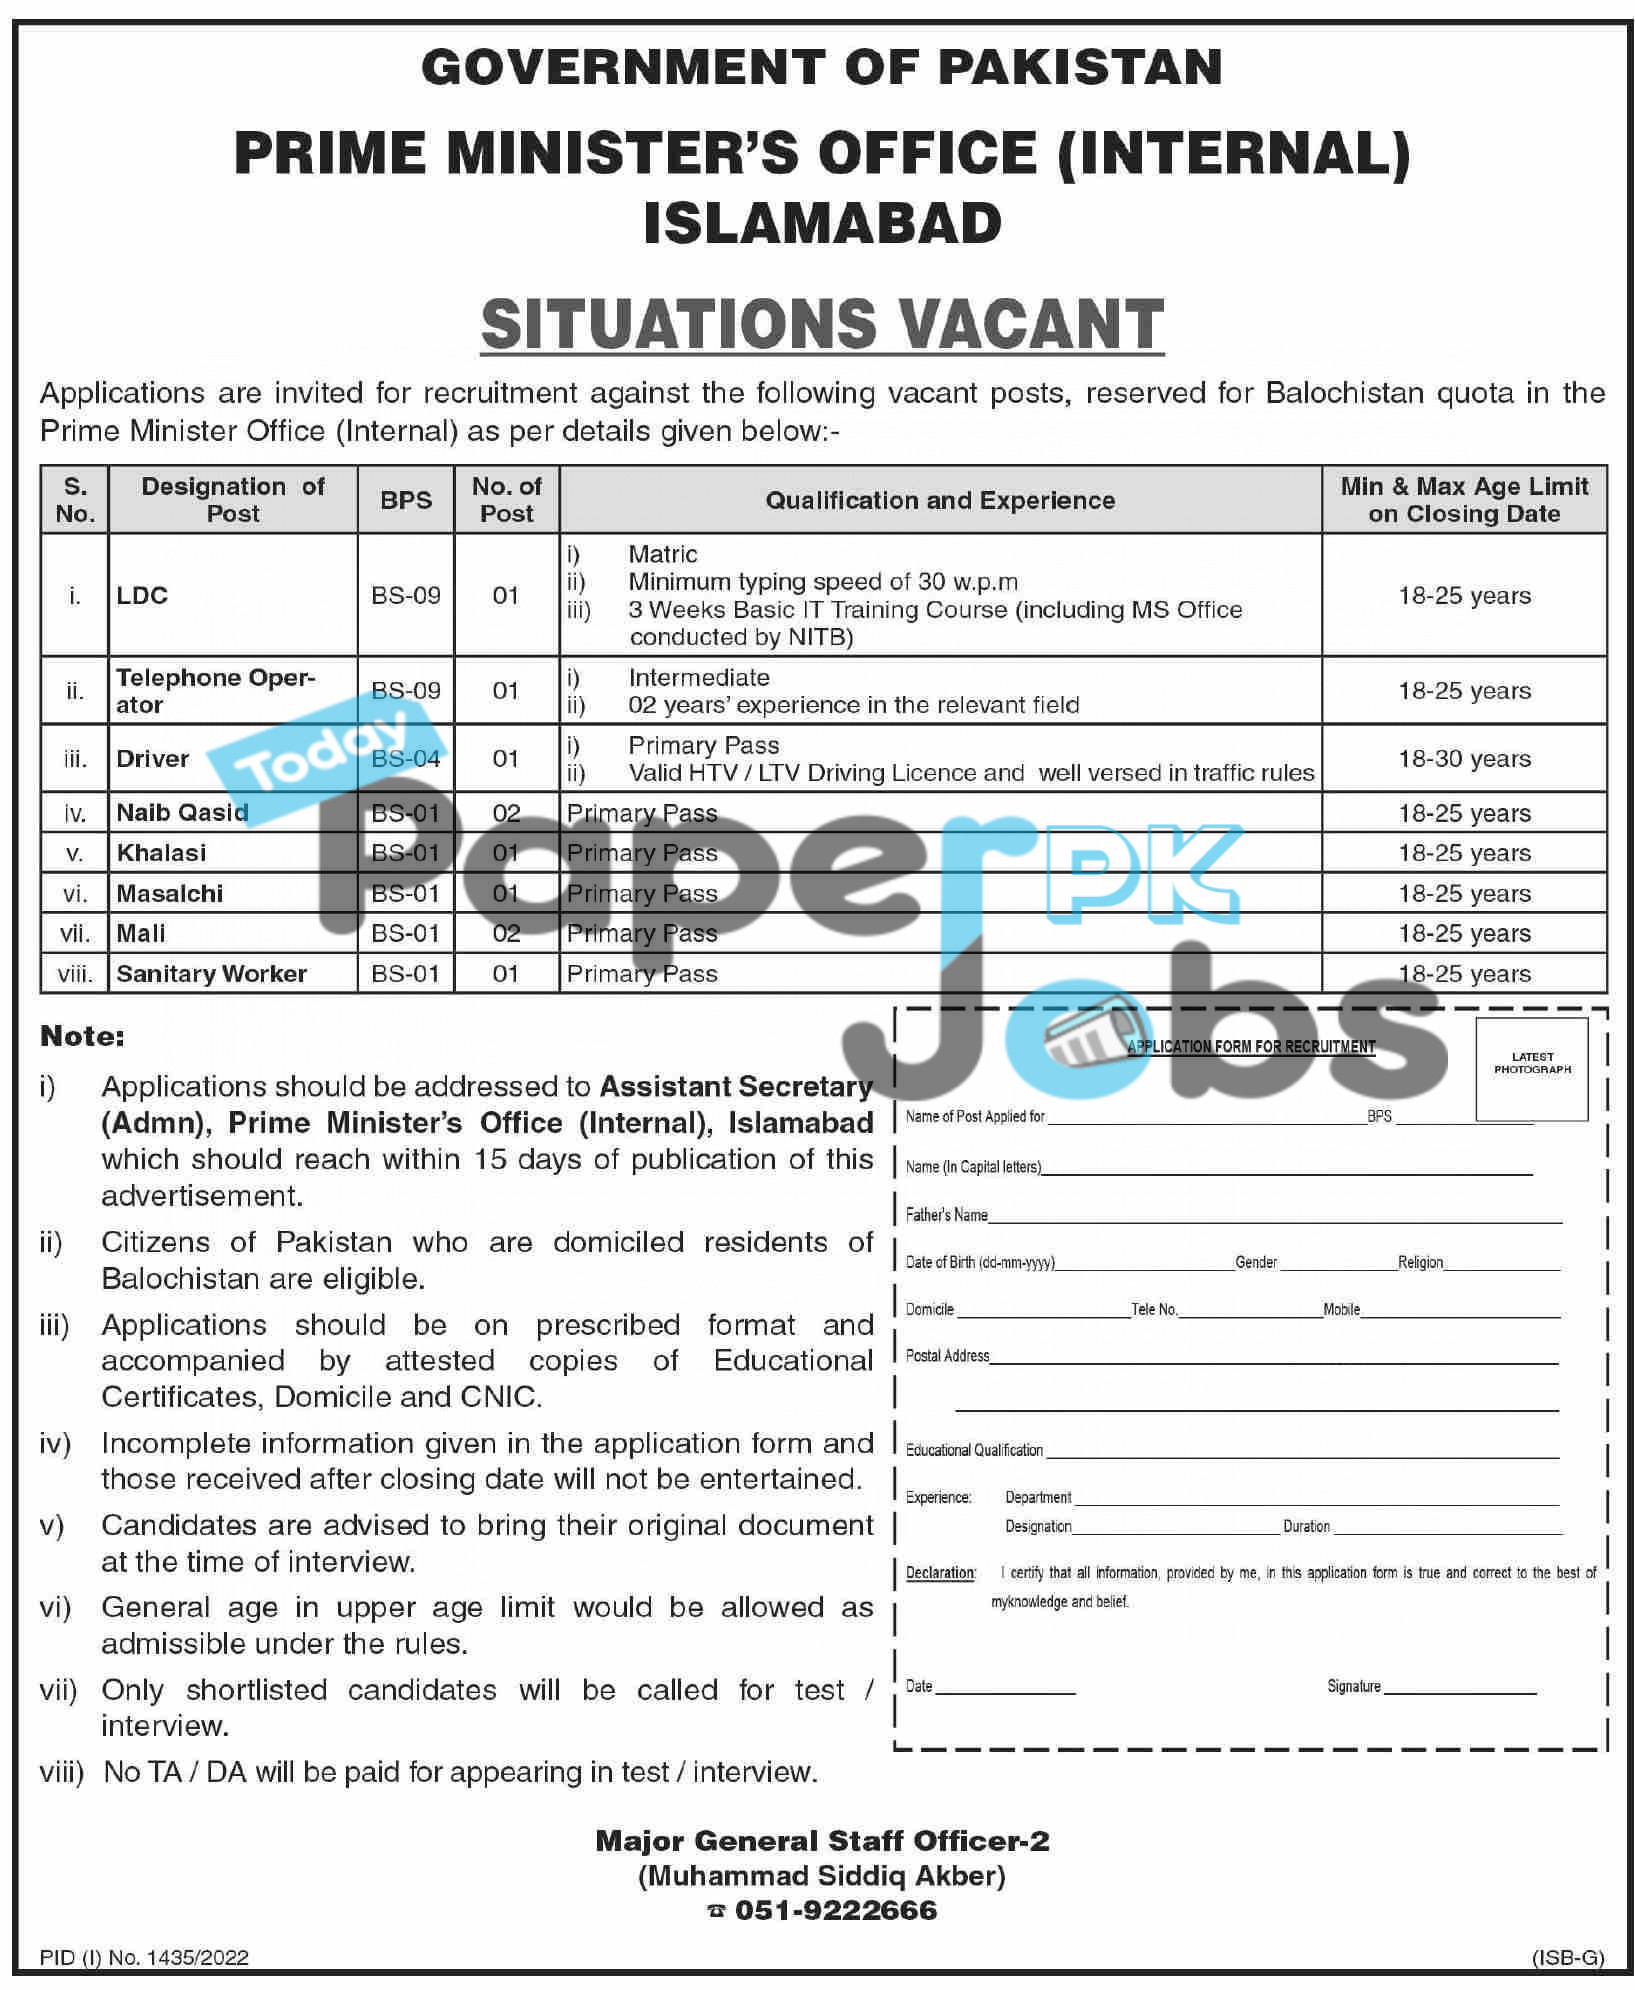 Prime Minister Office Internal Islamabad Jobs 2022 with Application Form